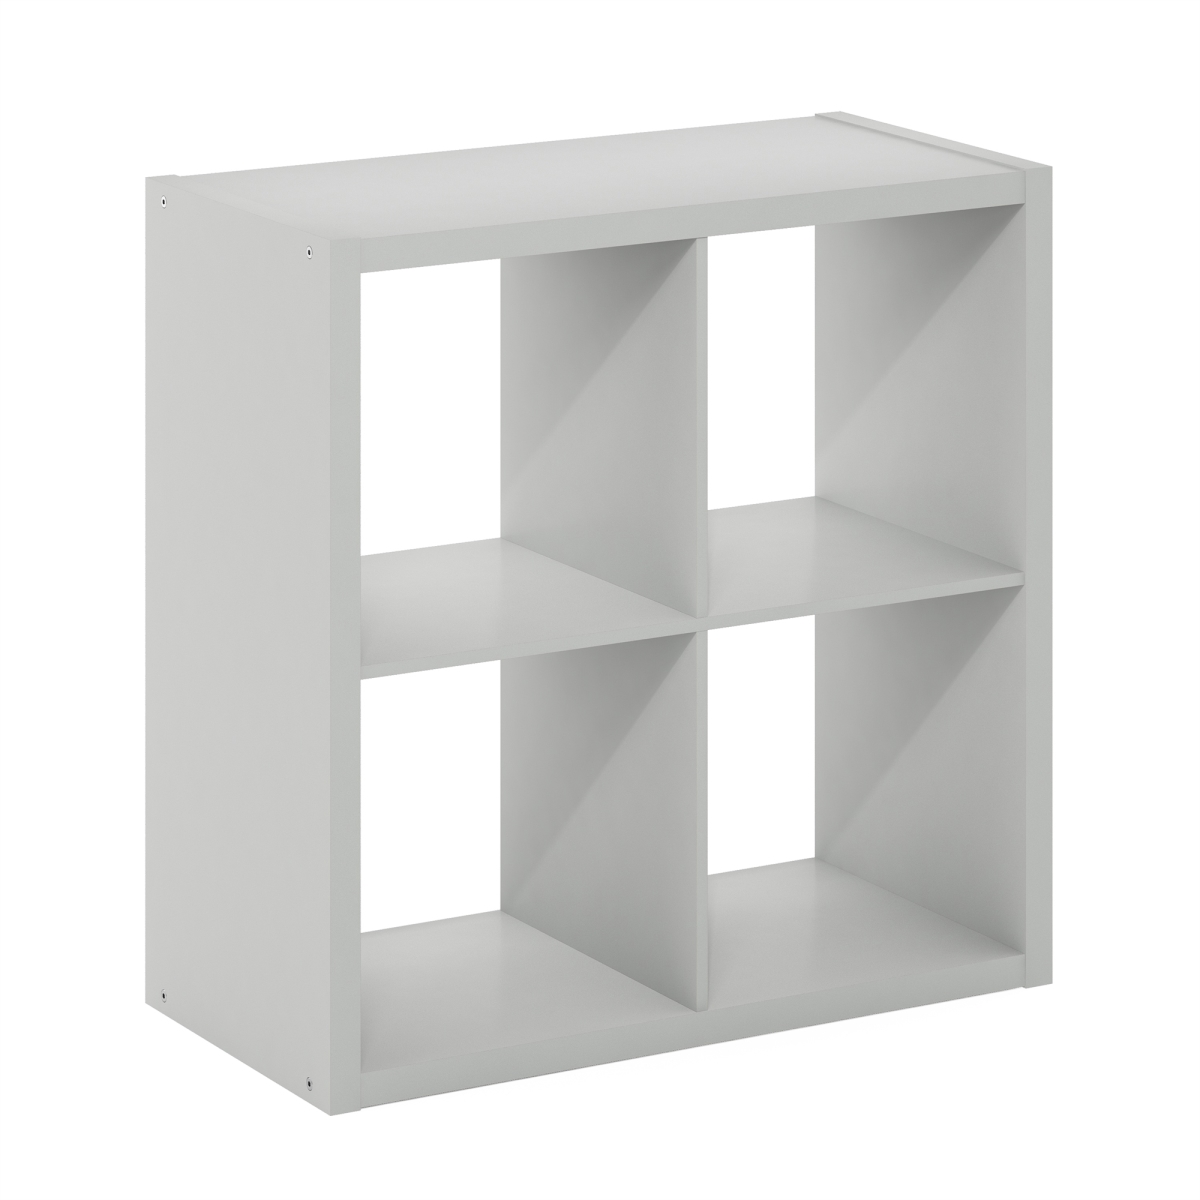 Picture of Furinno LU22004LG Cubicle Open Back Decorative Cube Storage Organizer - 4-Cube, Light Grey